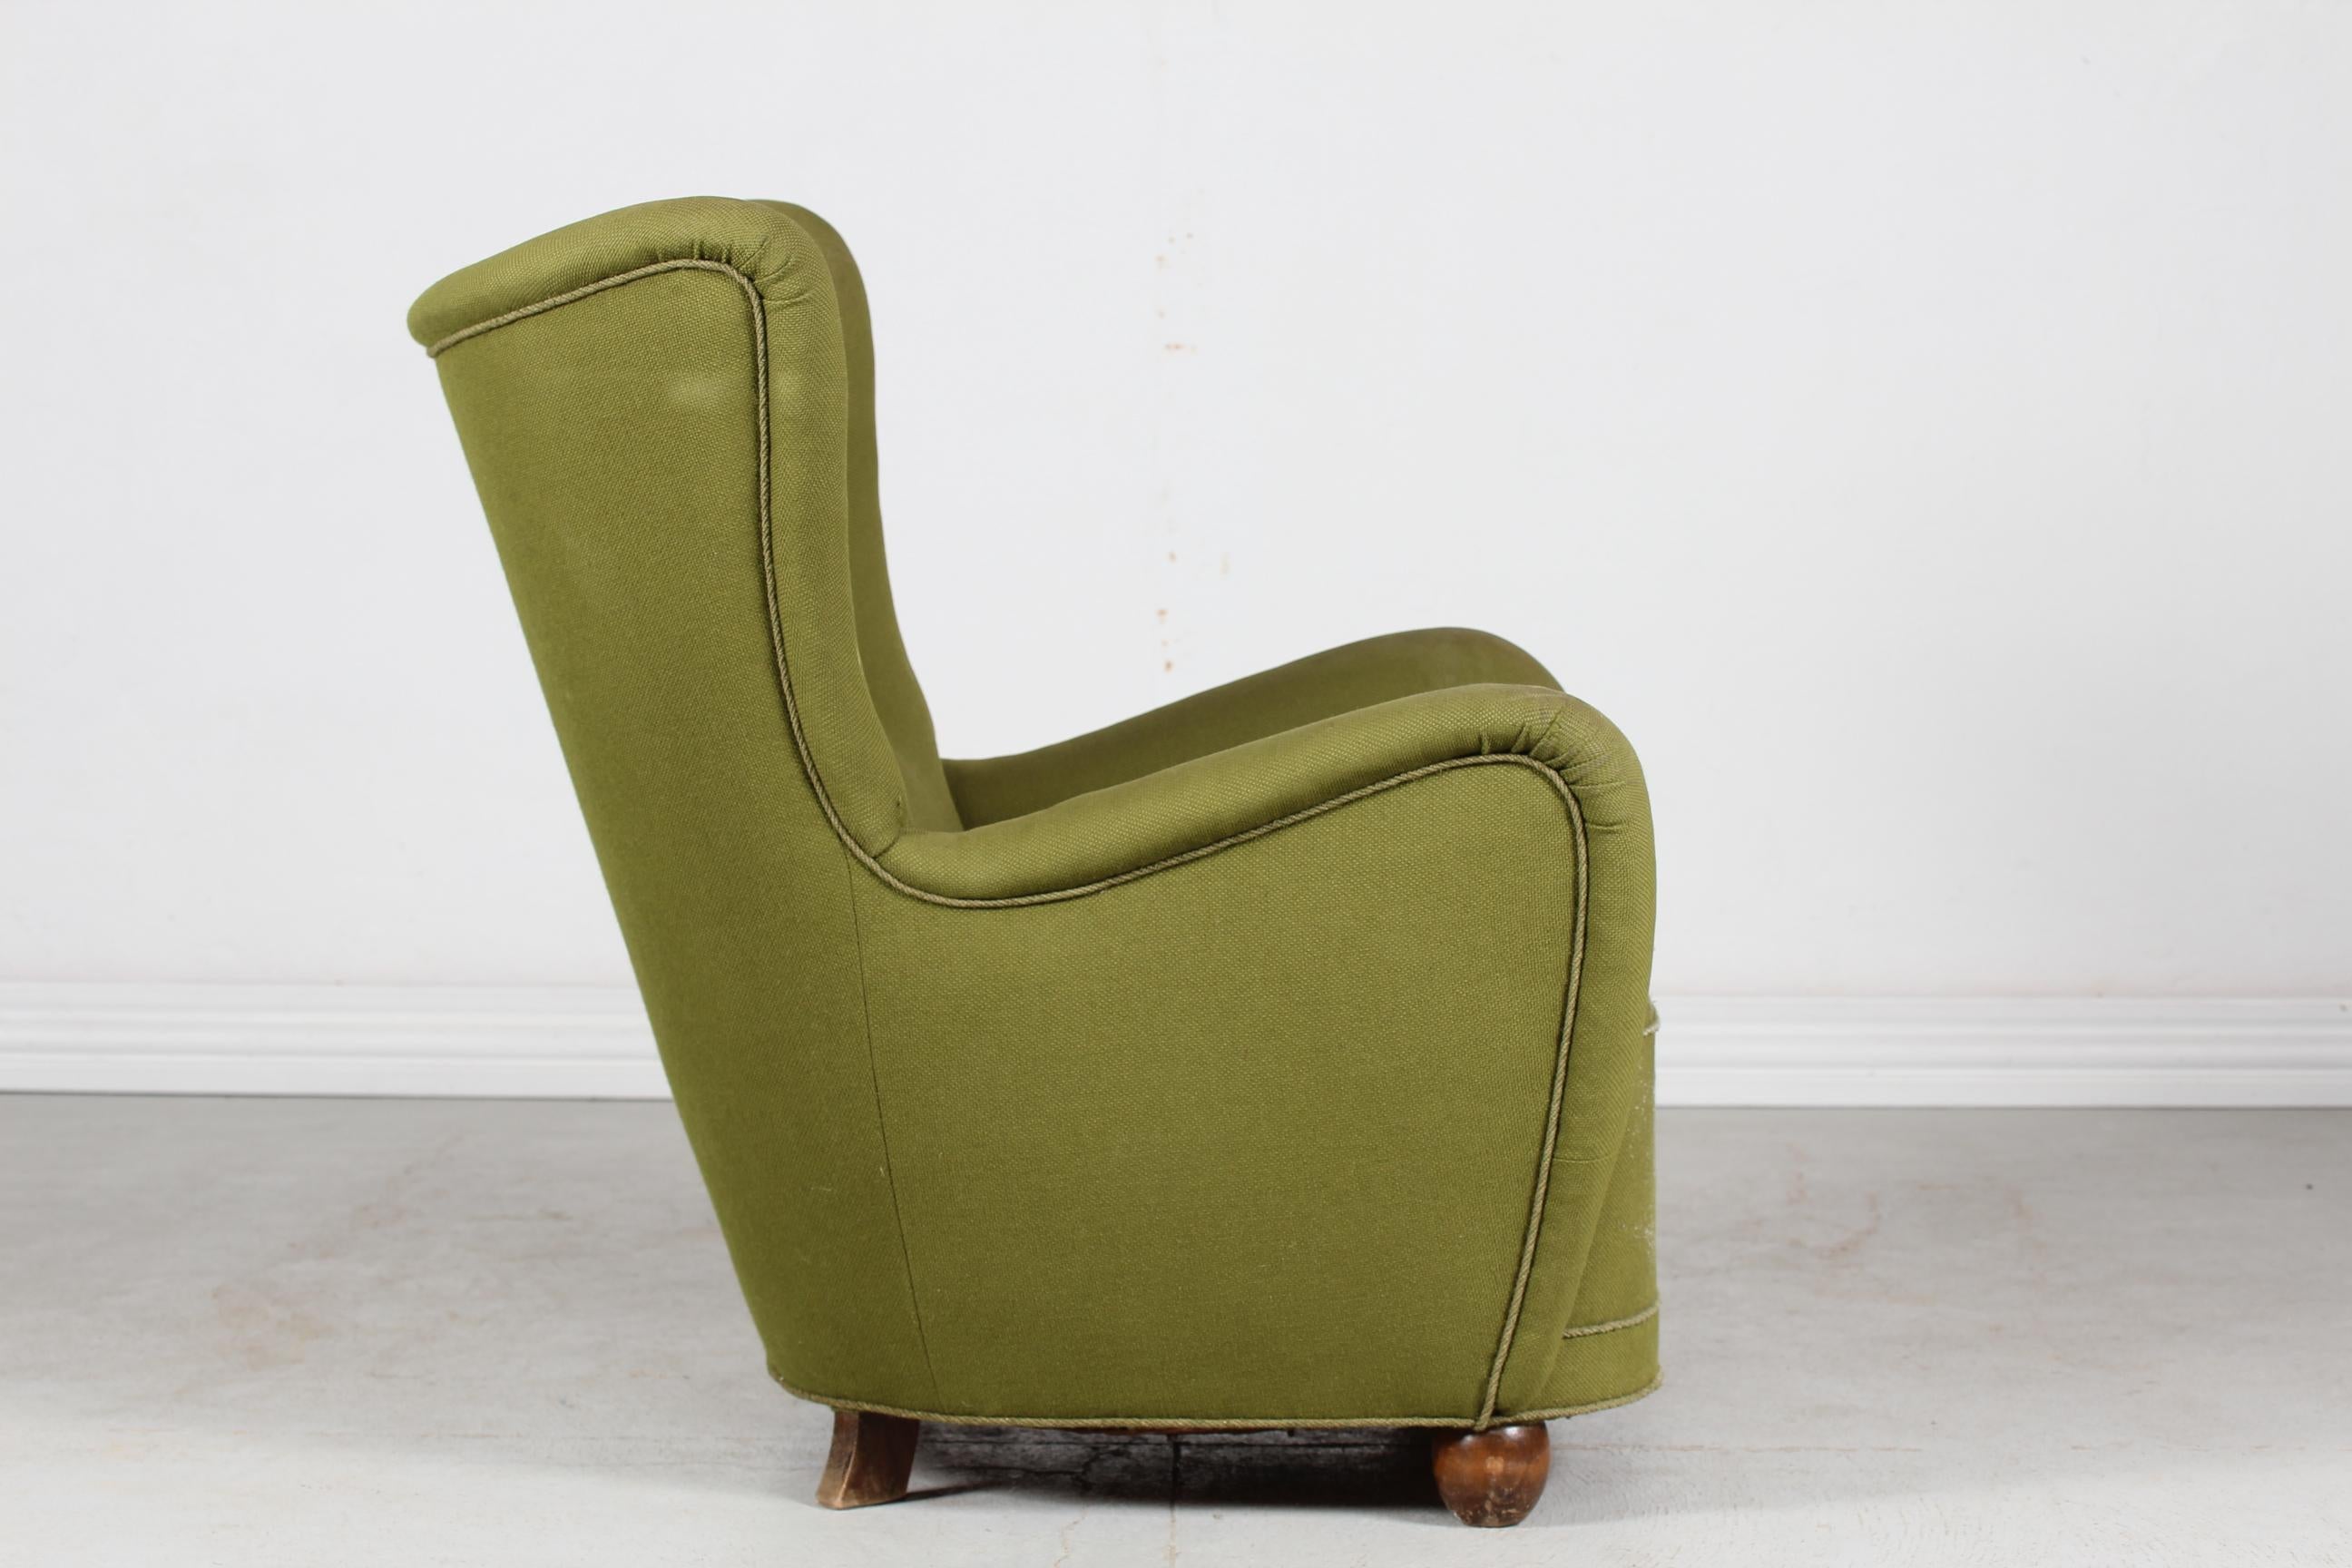 Mid-20th Century Large Danish Art Deco Lounge Chair Fritz Hansen Style, 1940s for Reupholstery